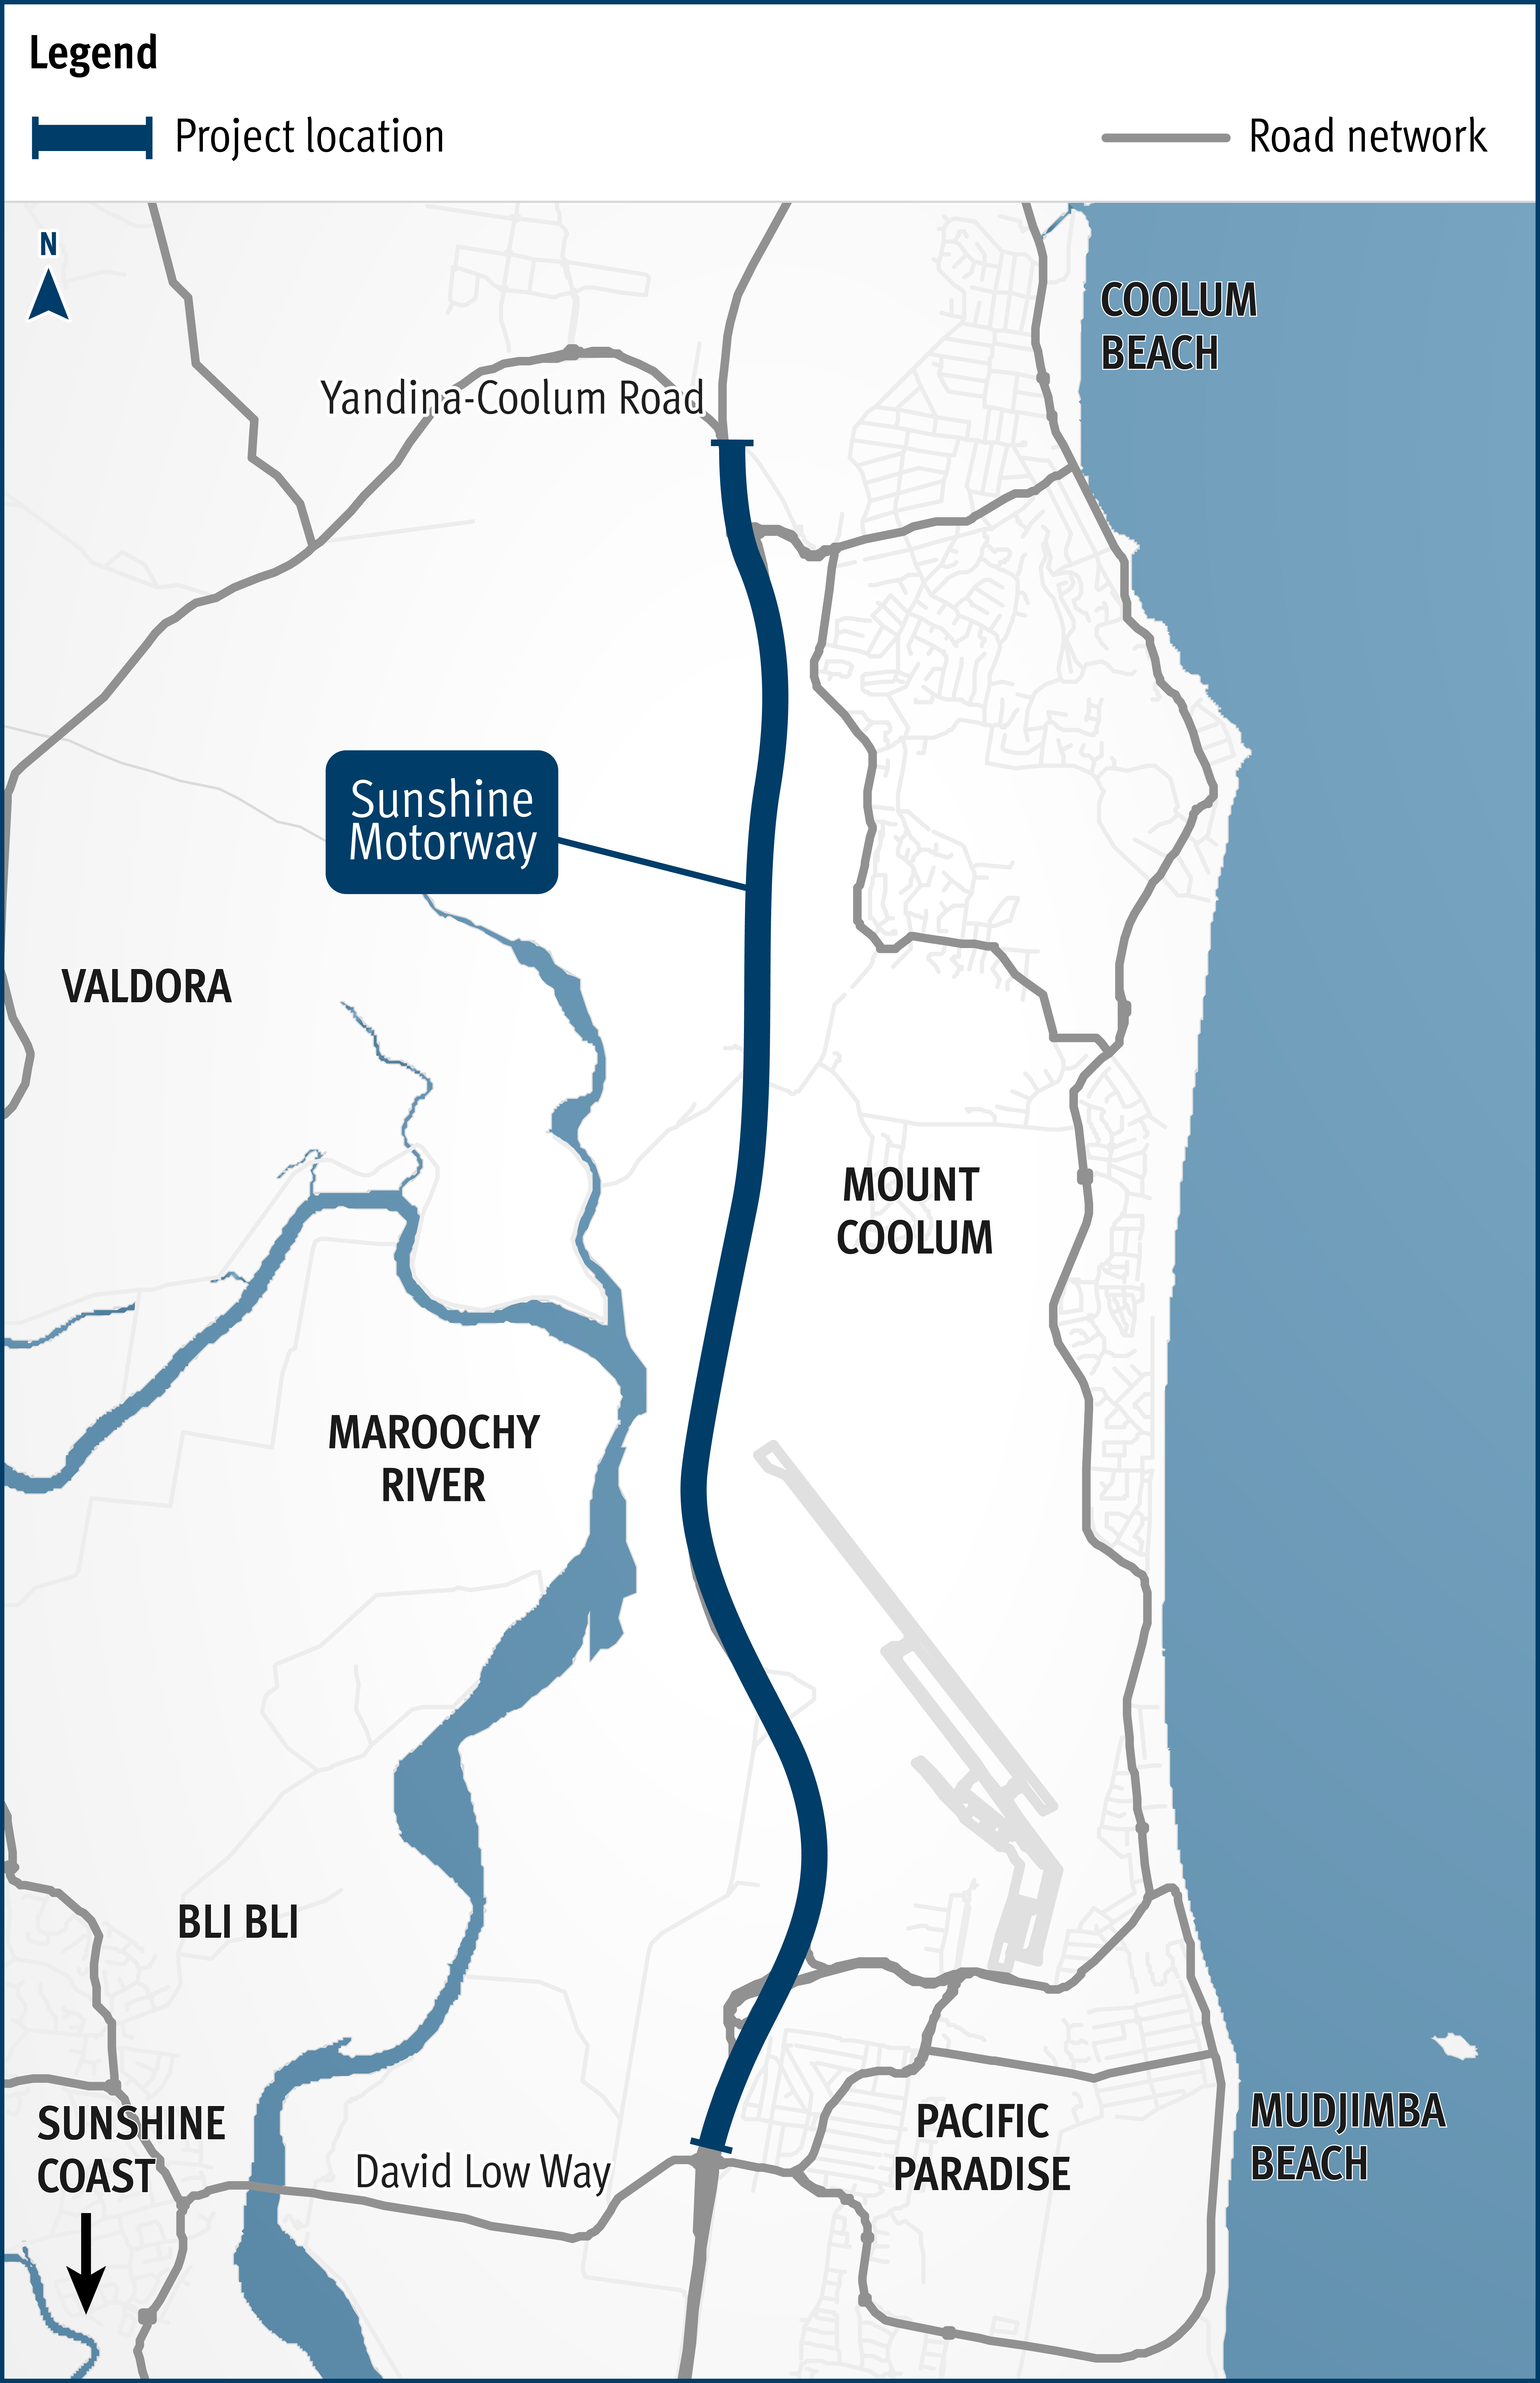 Map showing the location of Mooloolaba Peregian David Low Way to Yandina Coolum Road duplication business case project